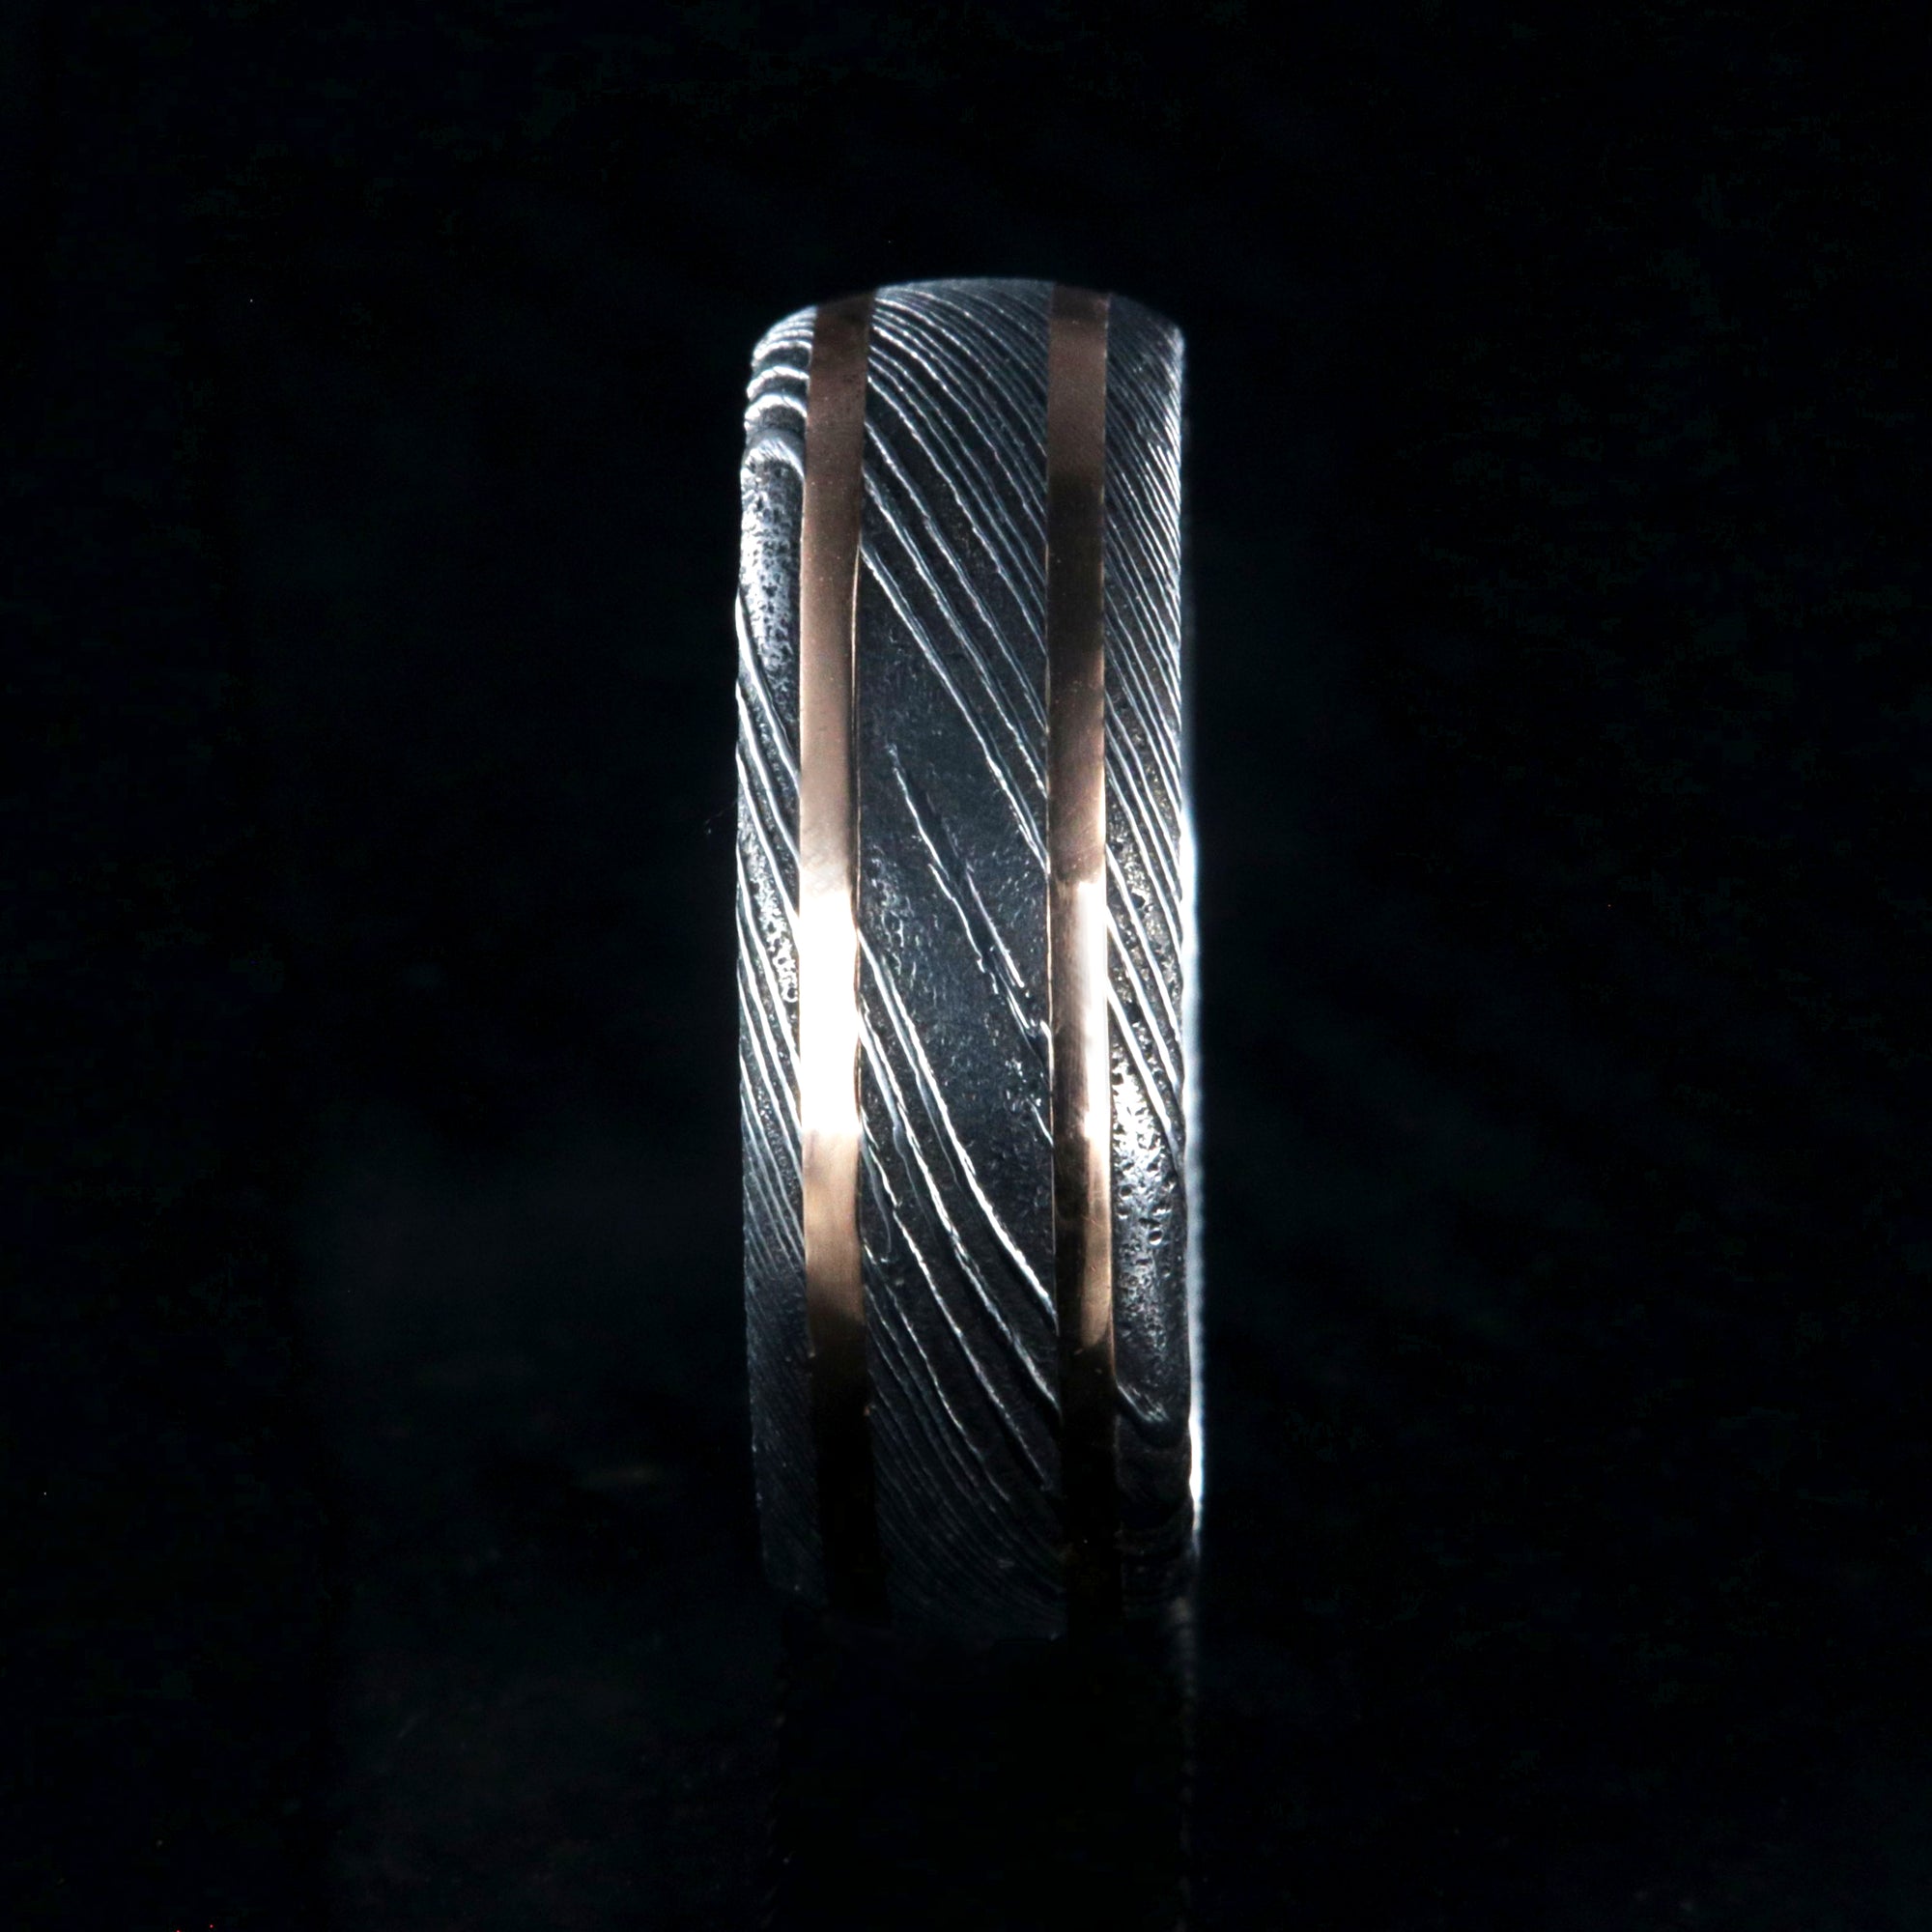 8mm wide black Damascus steel wedding ring with two thin edge rose gold  inlays and polished inside